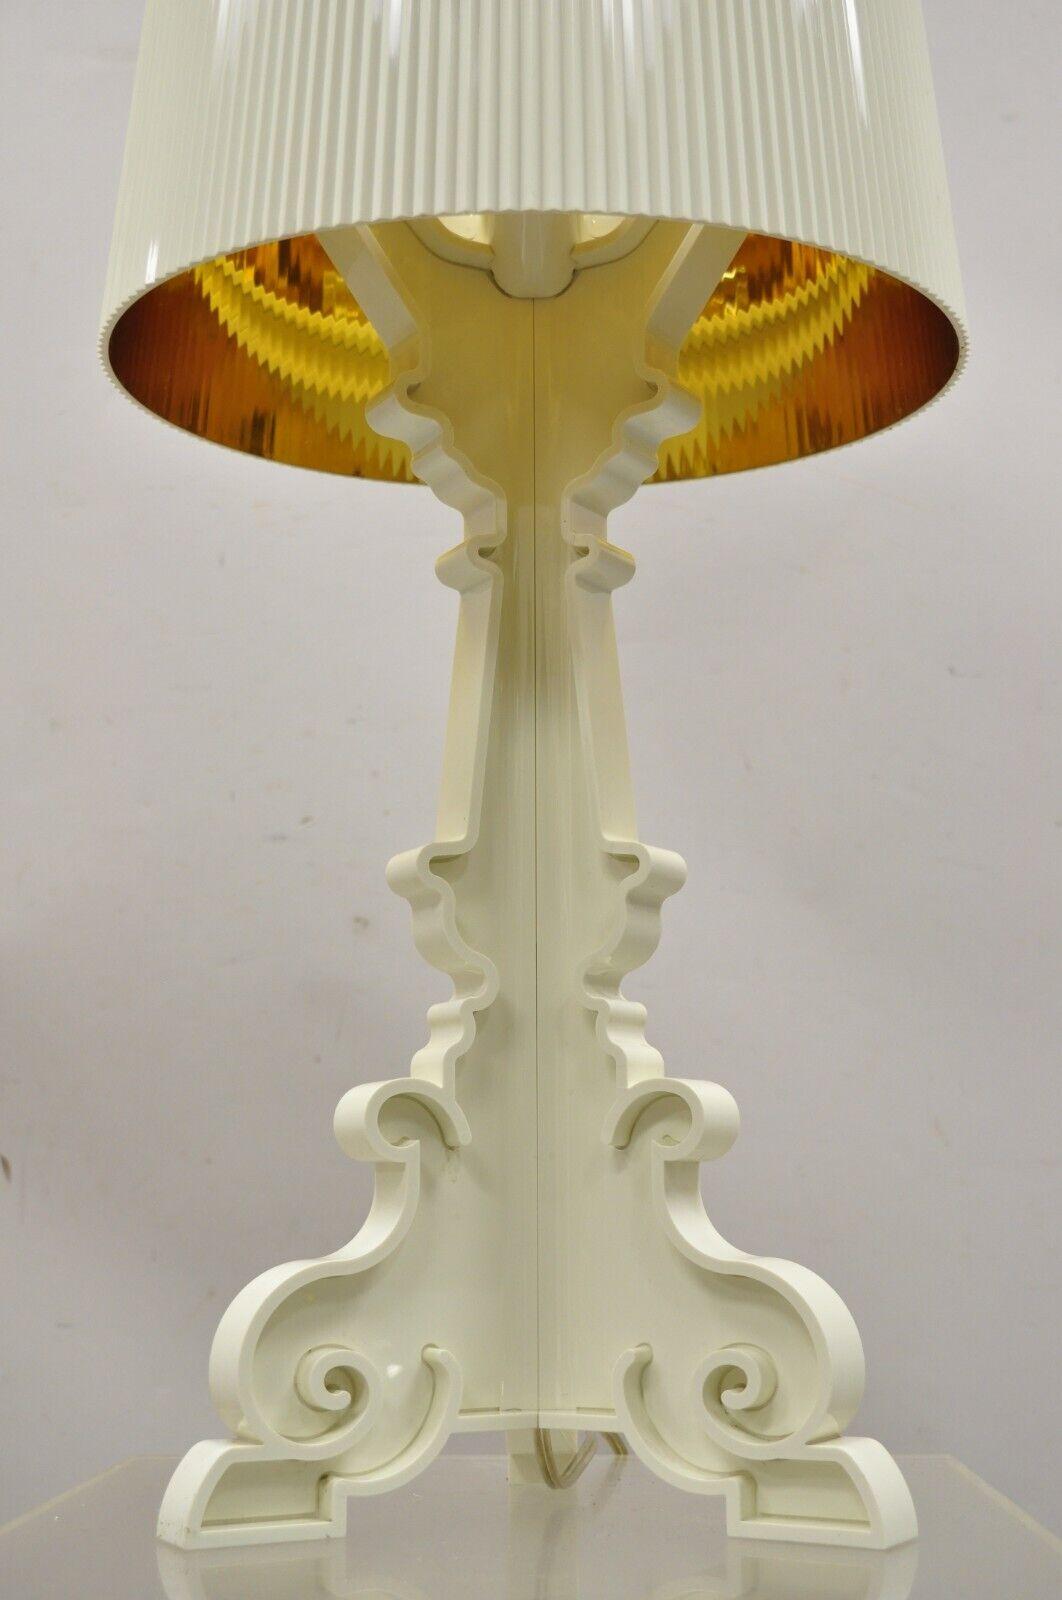 Contemporary Kartell Ferruccio Laviani Bourgie White Baroque Table Lamp with Shade For Sale